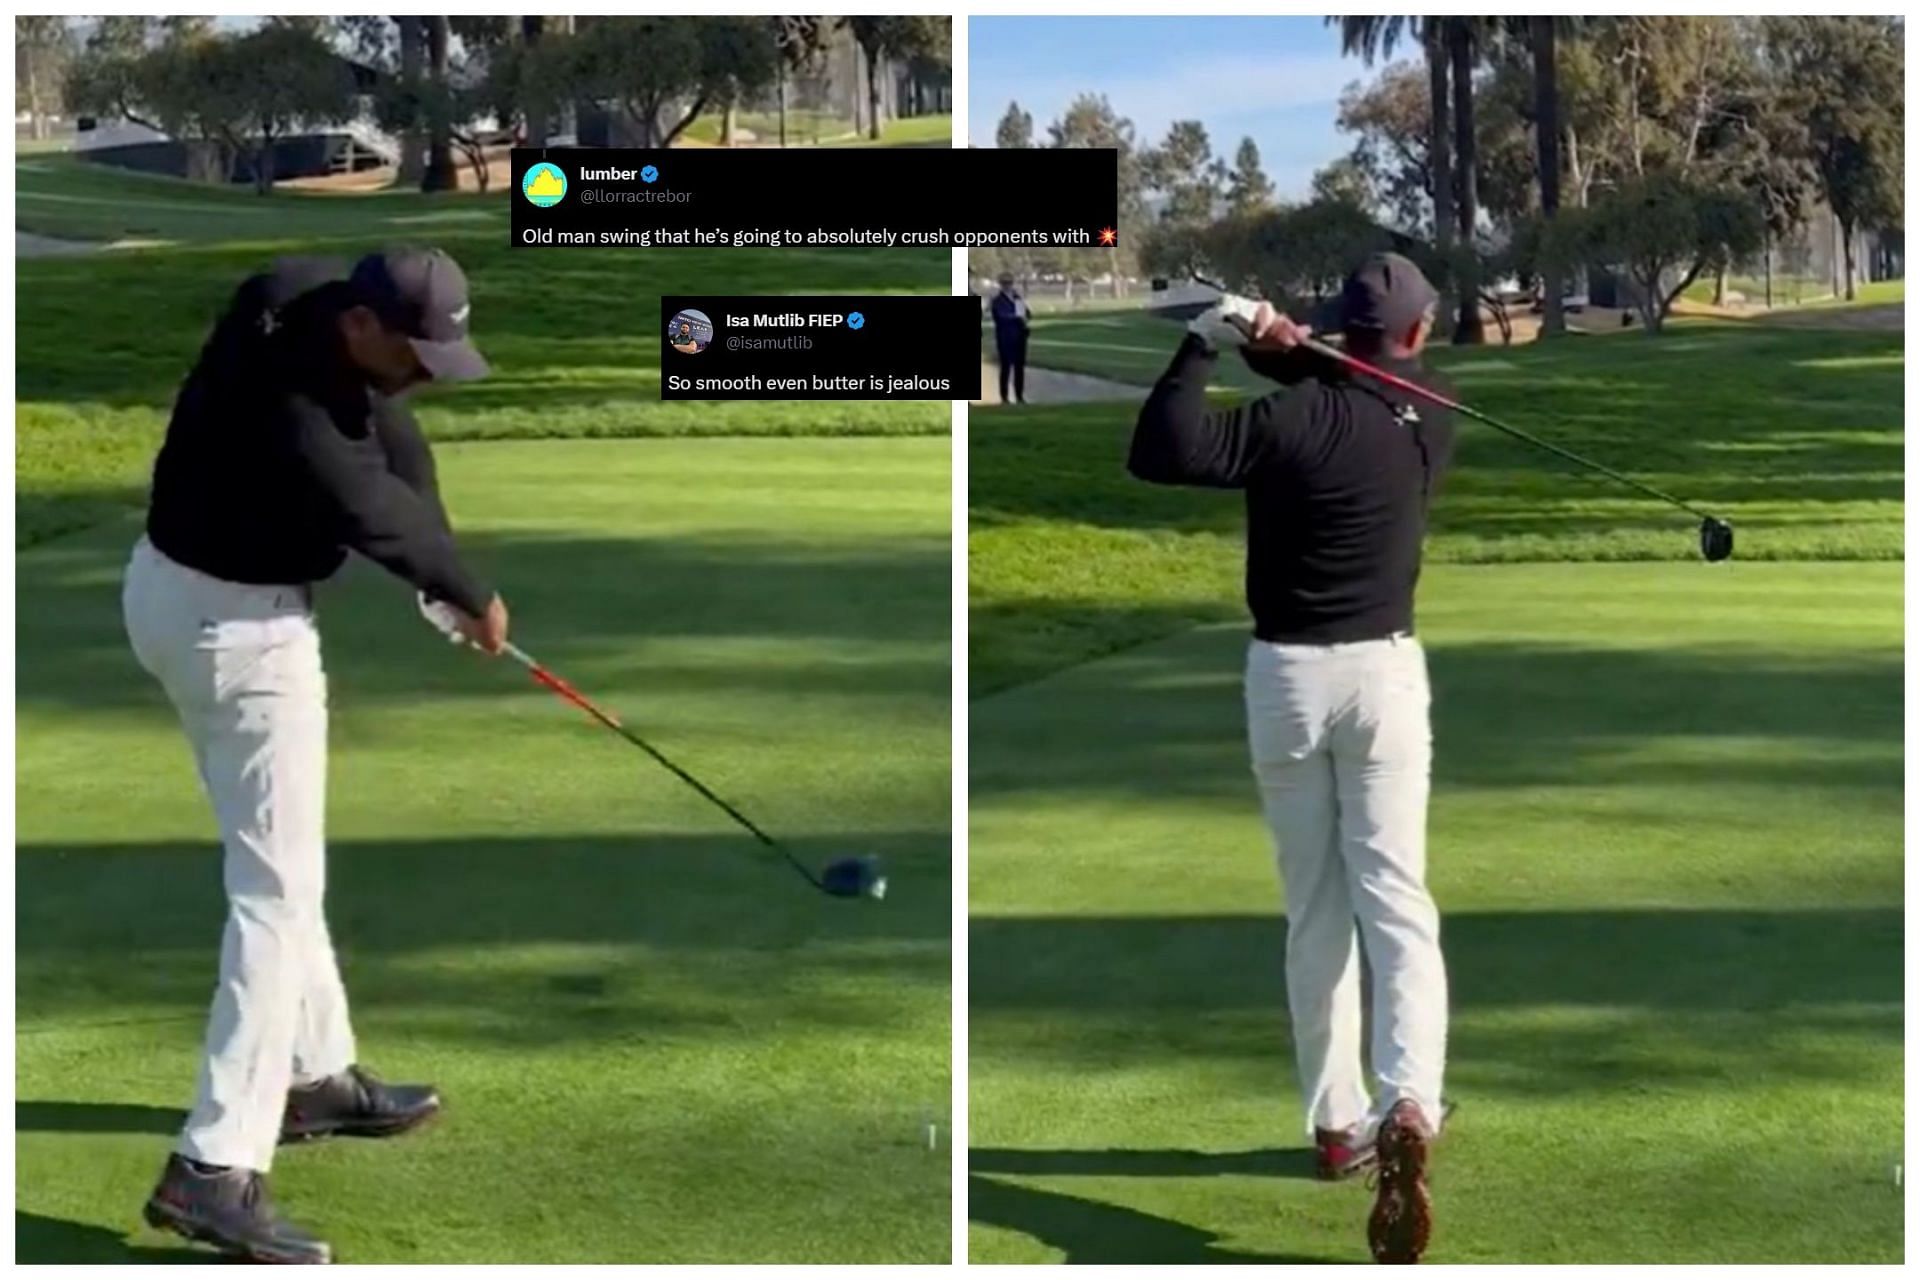 “Old man swing” “So smooth” Fans react to Tiger Woods practicing his